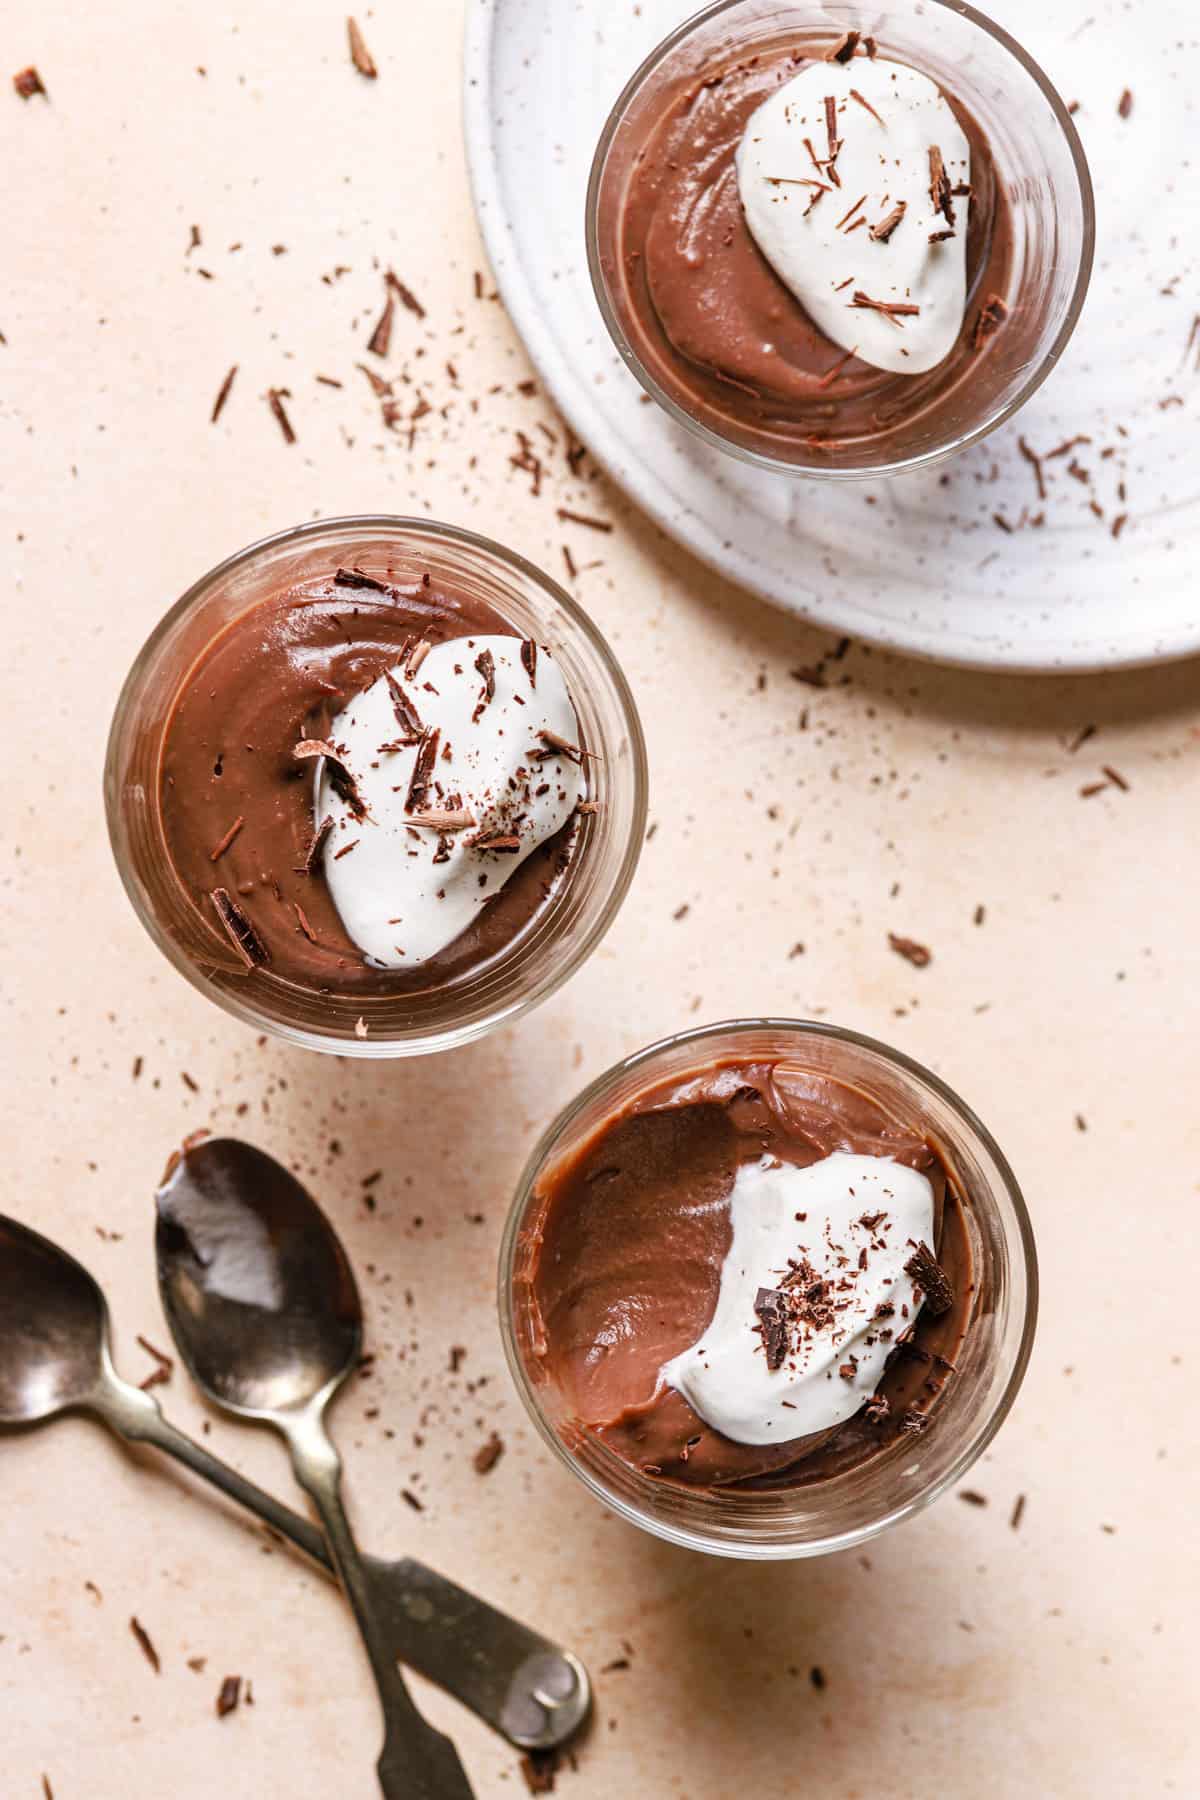 A top down photo with two glasses of chocolate pudding topped with whipped cream on the pink counter and the bottom glass has a bite taken out with two spoons to the left and a white plate with a glass of chocolate pudding on top with whipped cream and chocolate shavings.